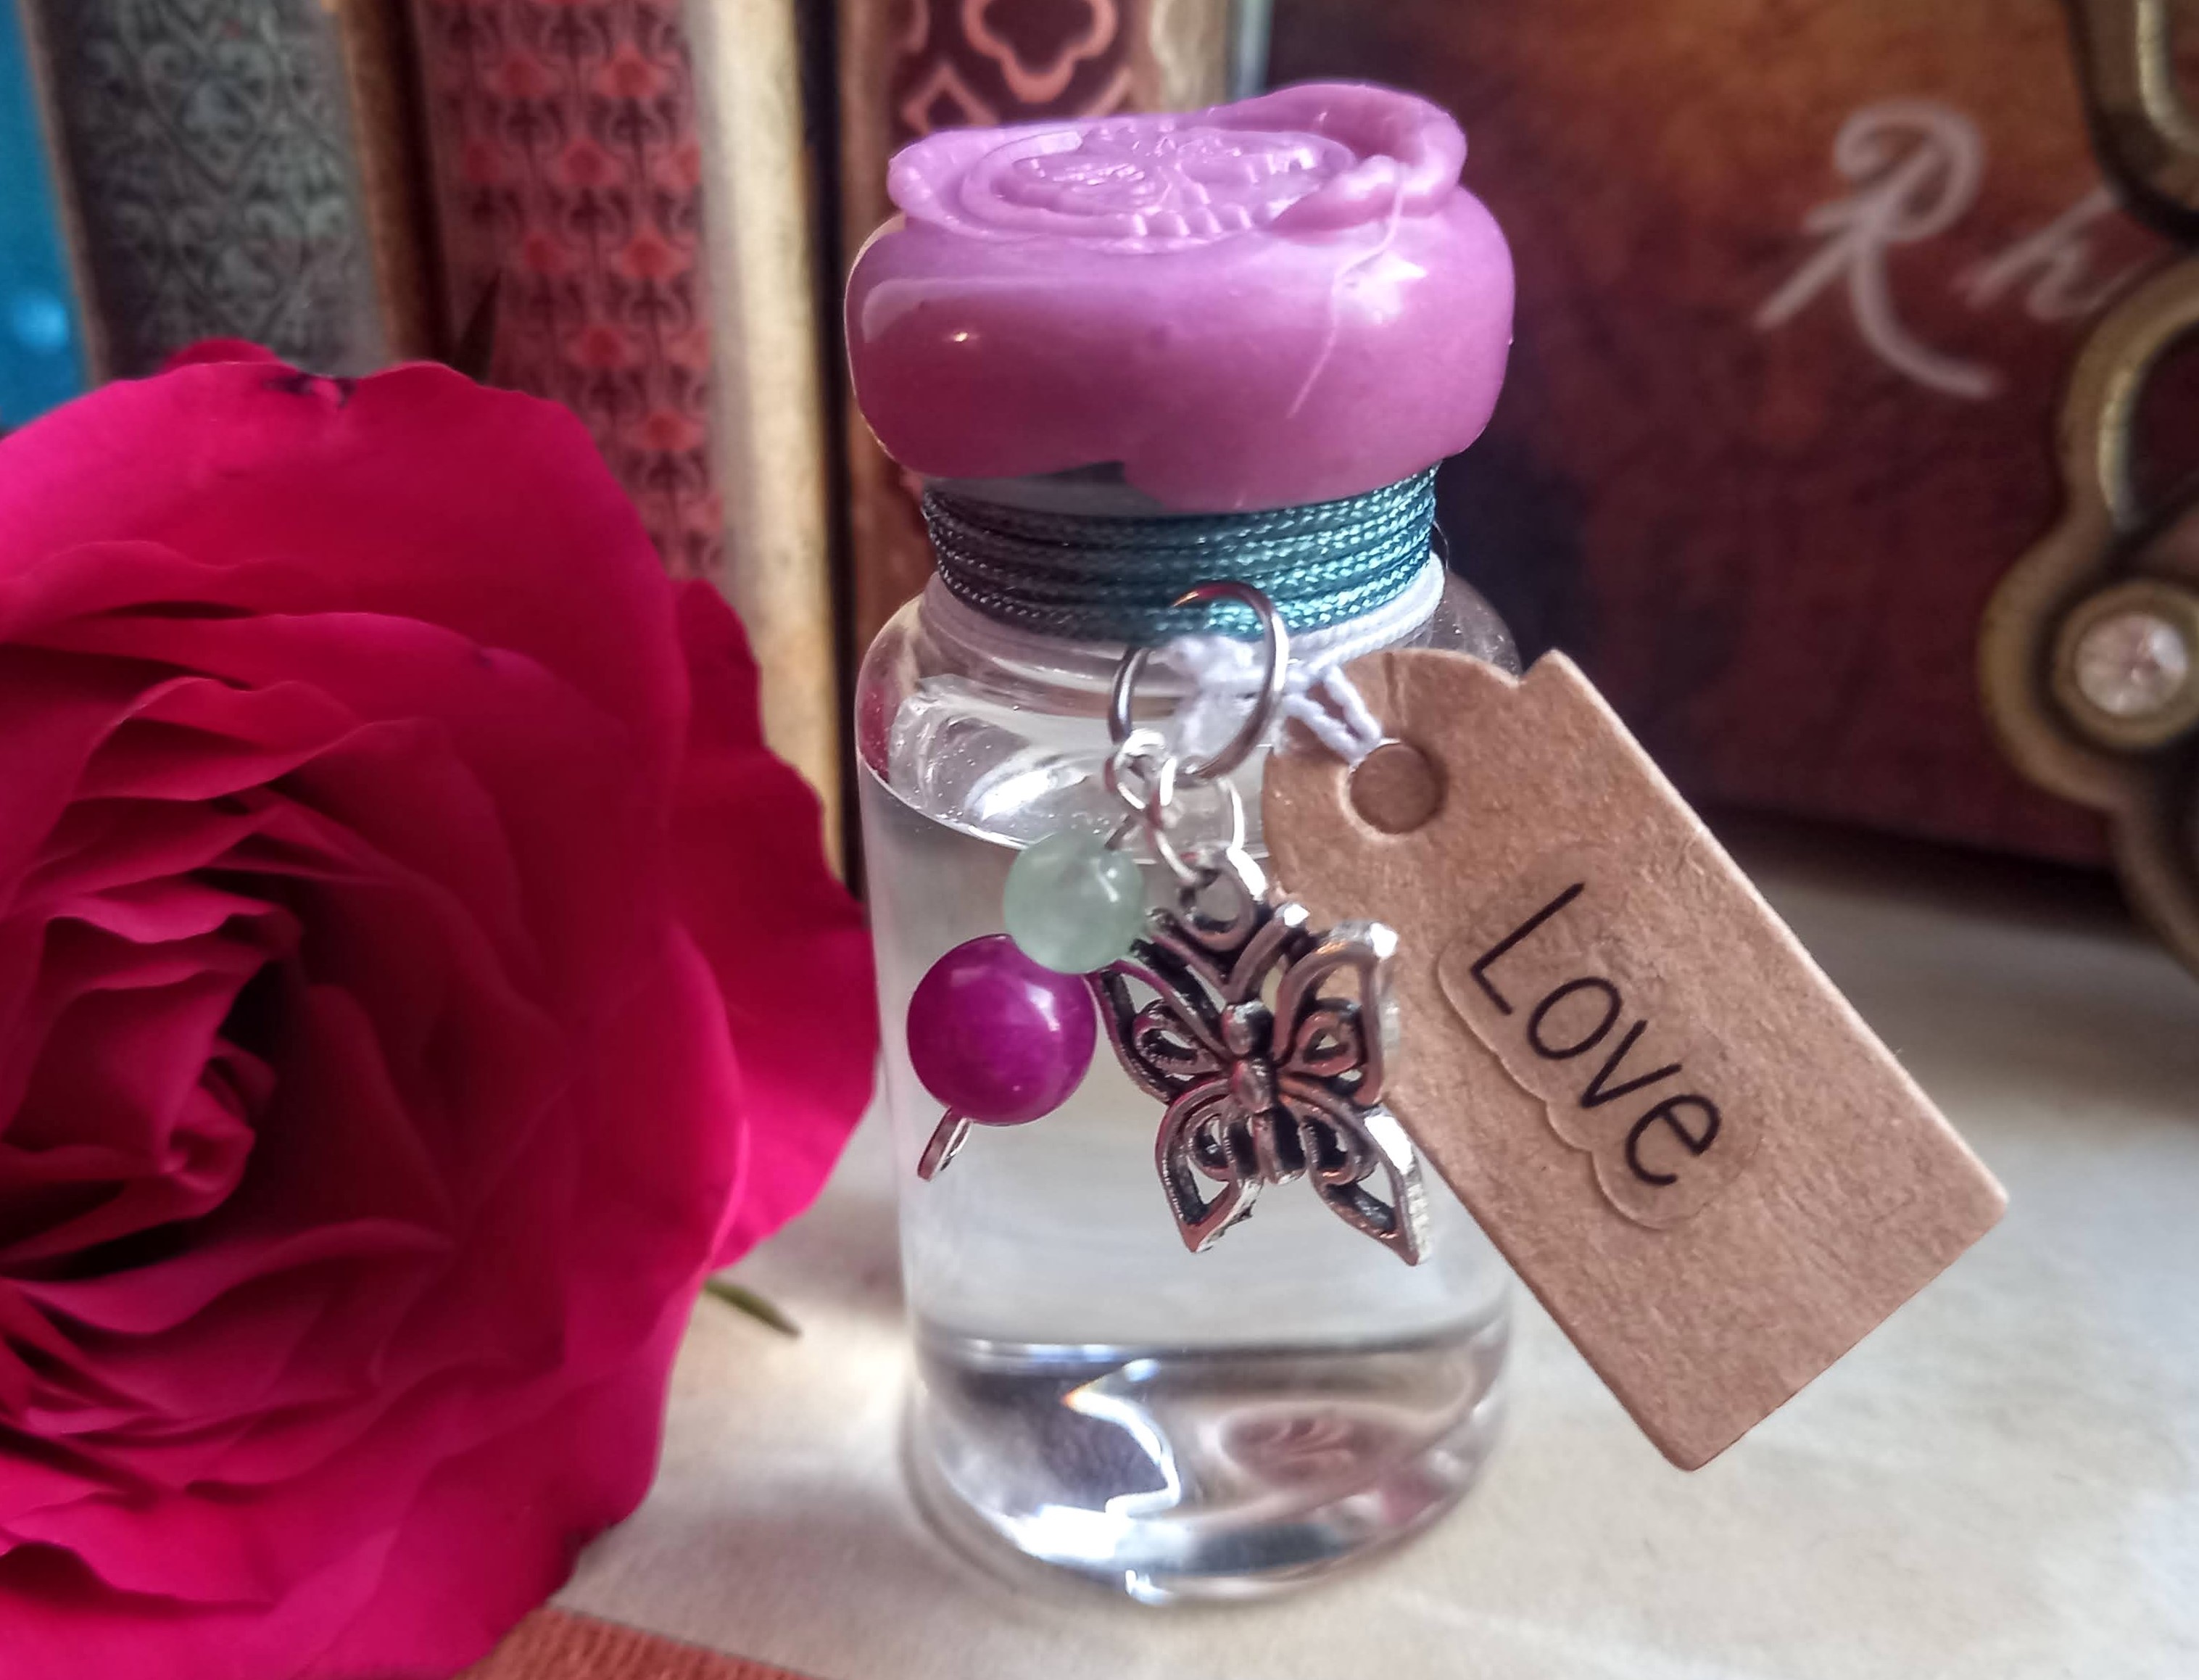 VIAL* Love and Transformation - Vial filled with St.Brigid Well Water from an Irish Holy Well.